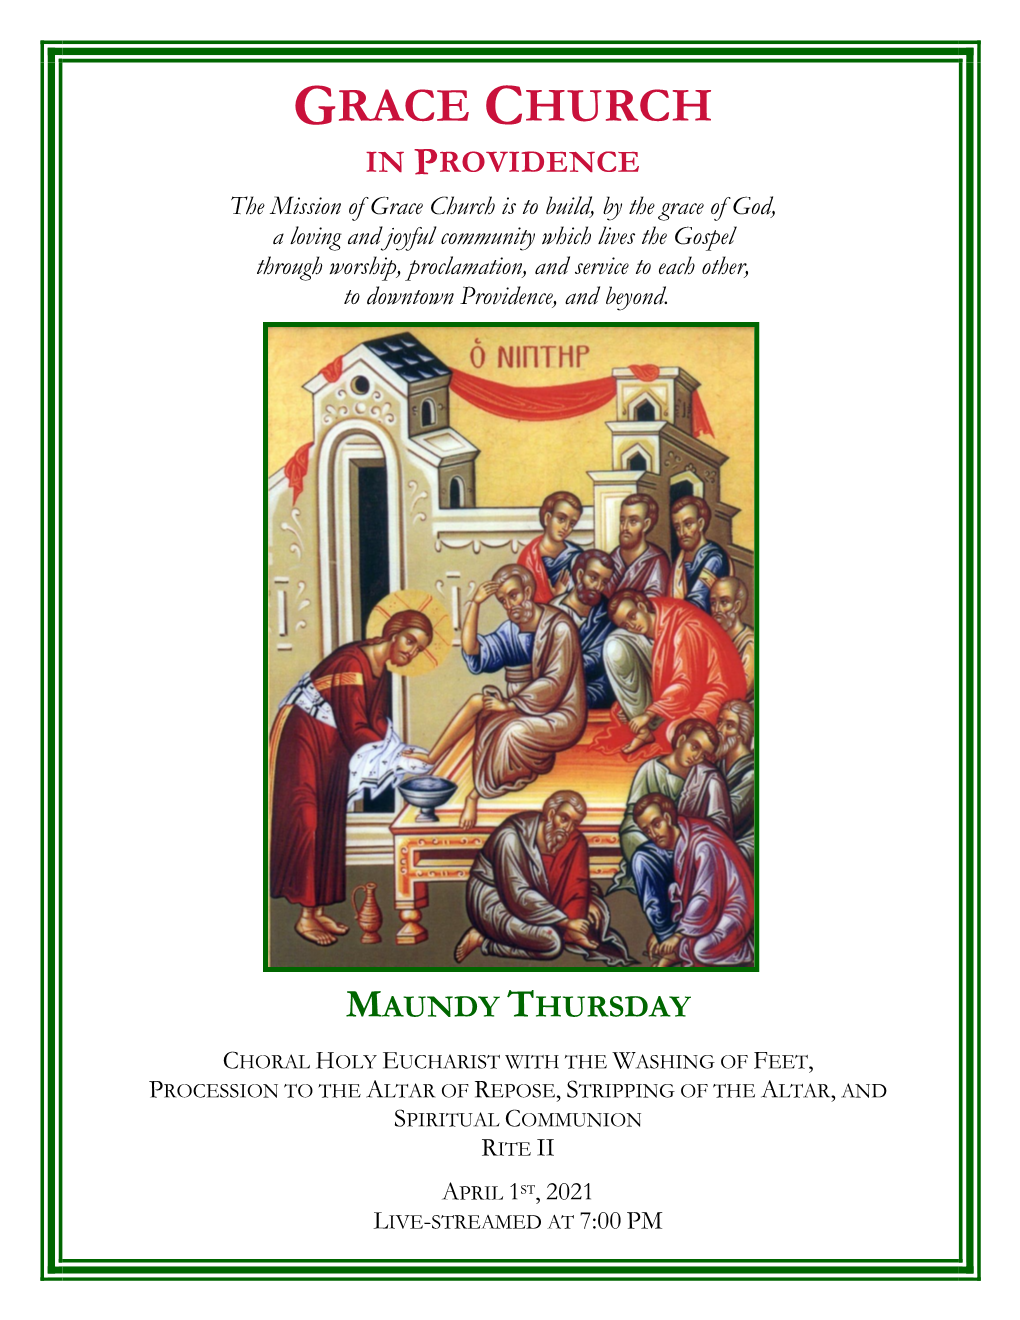 The Order of Service for Maundy Thursday